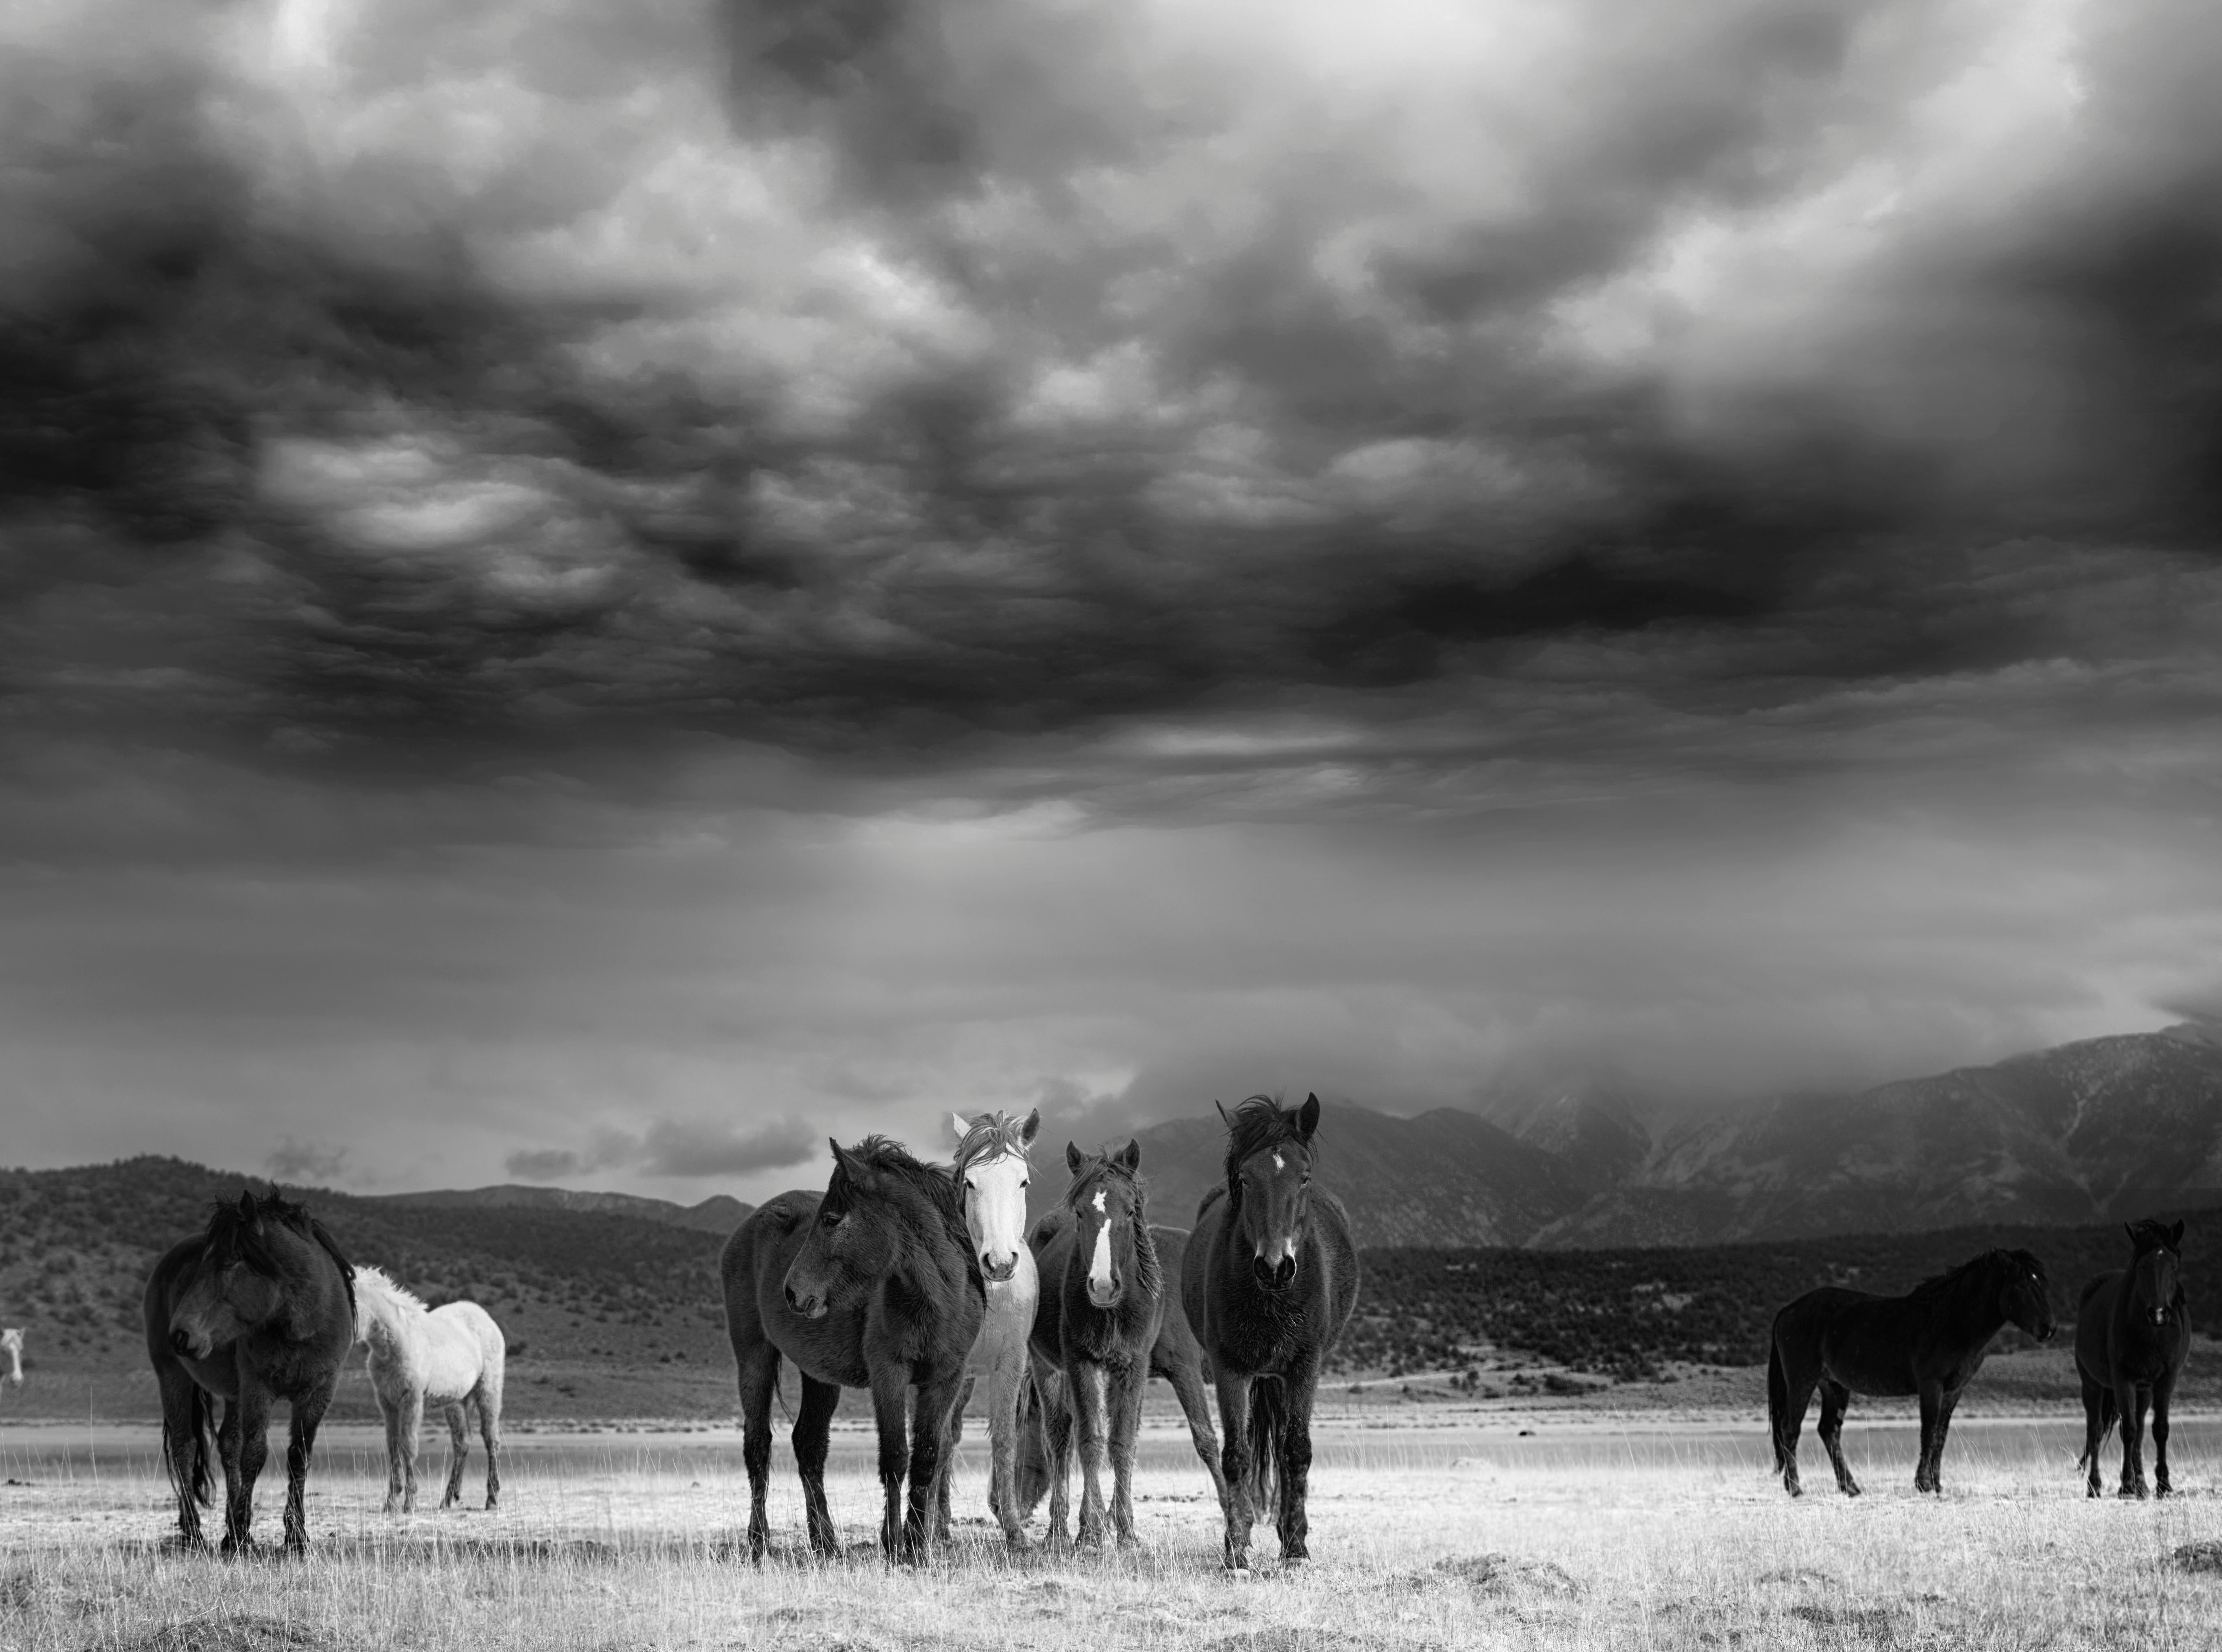 Shane Russeck Animal Print -  "The Calm" 40x60 Black & White  Photography of Wild Horses Mustangs Photograph 